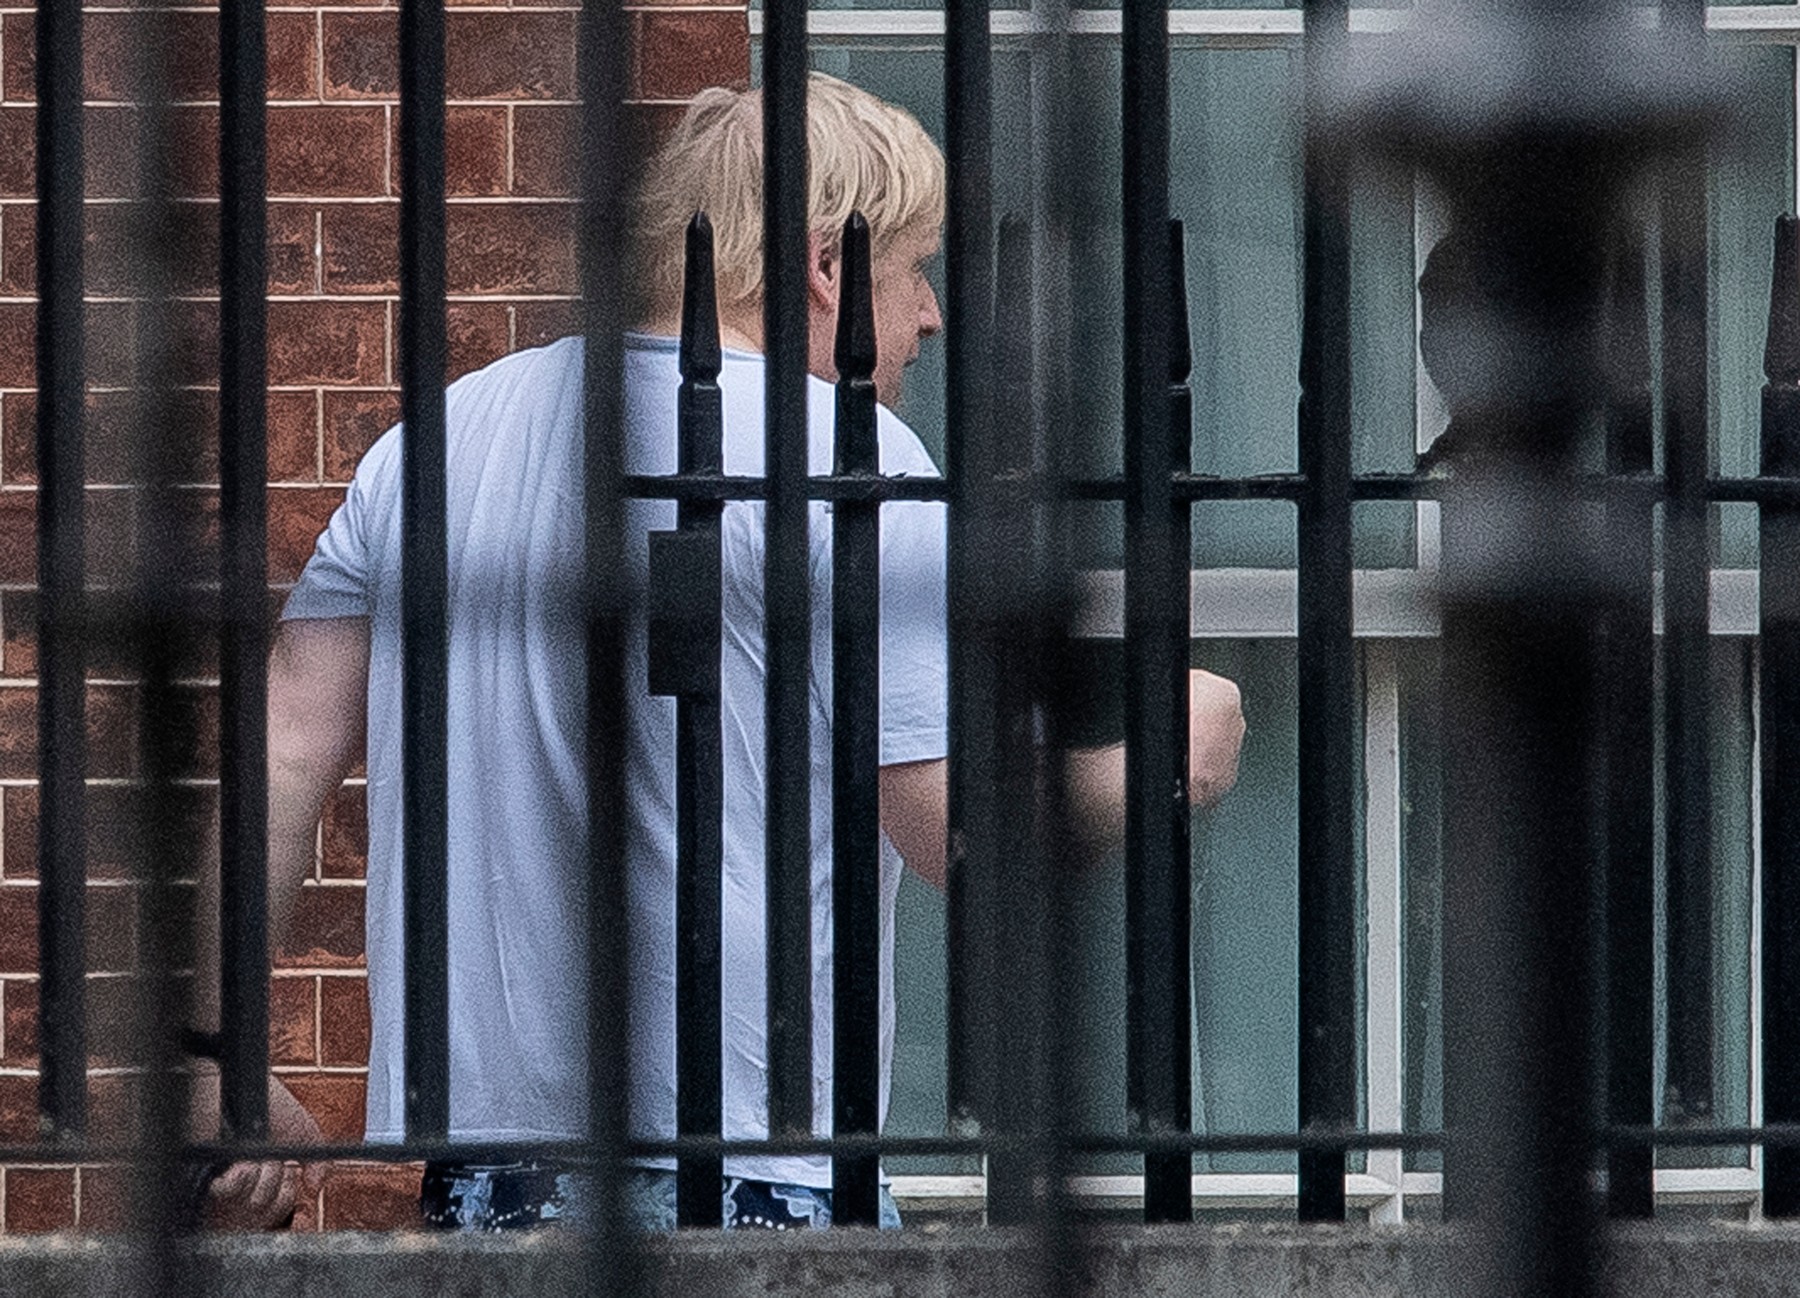 19/05/2020. London, UK. British Prime Minister BORIS JOHNSON is seen returning to Downing Street after a morning jog in a private gardens. The PM, who has pledged to tackle obesity in the UK, is recovering after being hospitalised with the COVID-19 strain of Coronavirus., Image: 520535699, License: Rights-managed, Restrictions: *** UK Out ***, Model Release: no, Credit line: Ben Cawthra / ddp USA / Profimedia